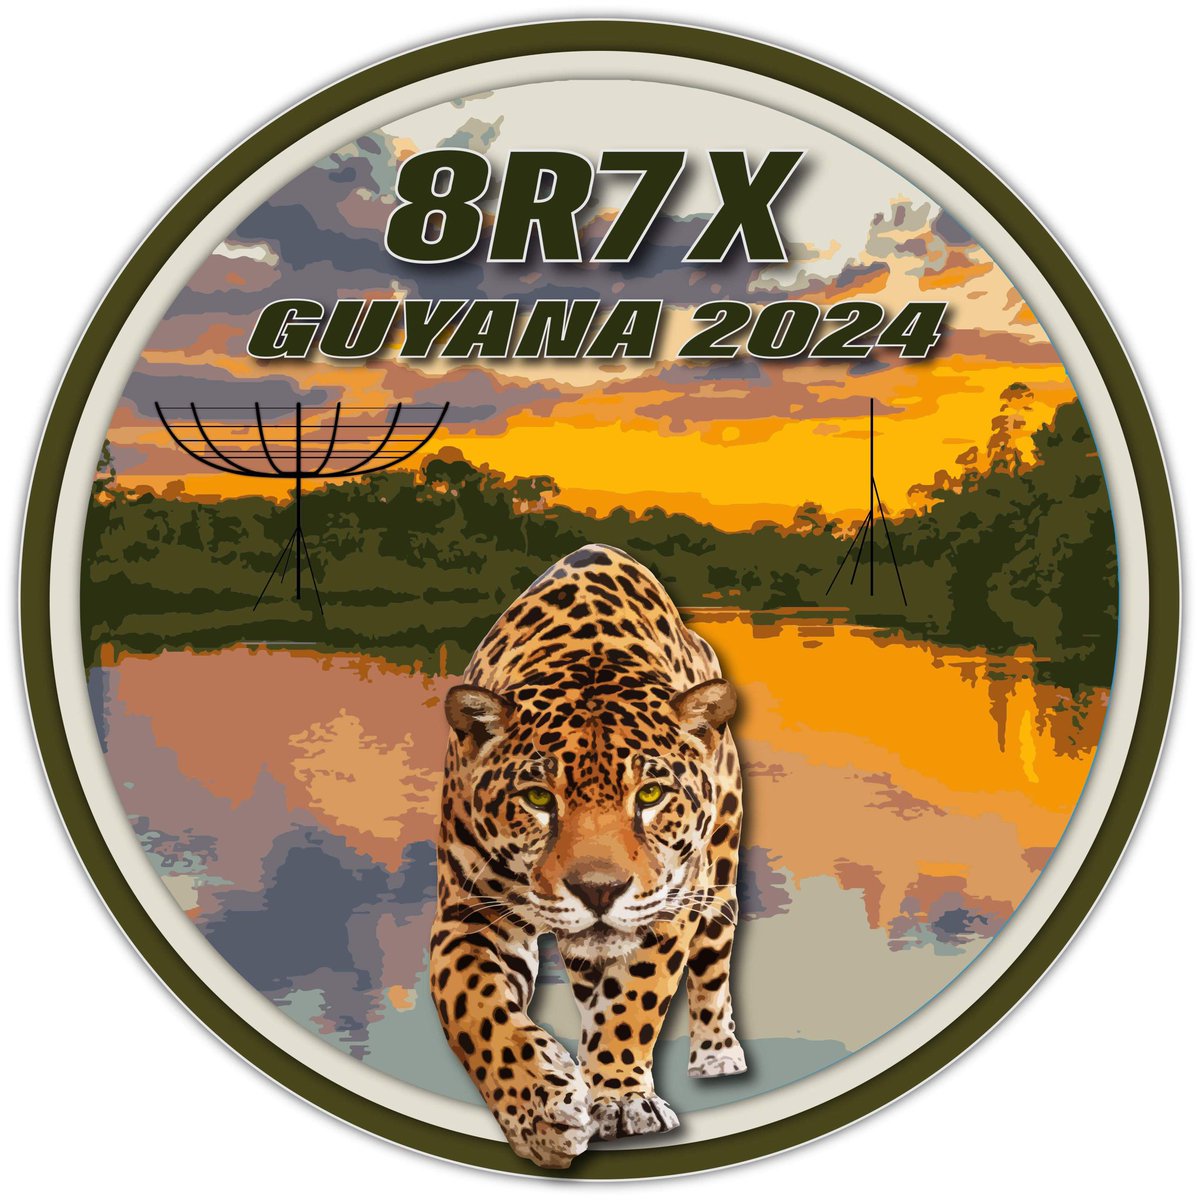 8R7X - Guyana 2024

The first log has been received from the Team in Guyana and is now available on M0OXO OQRS and Clublog.

Website 8r-2024.com
Livestream clublog.org/livestream/8R7X
QSL Service 8r-2024.com/qsl-service/
Log m0oxo.com/oqrs/logsearch…